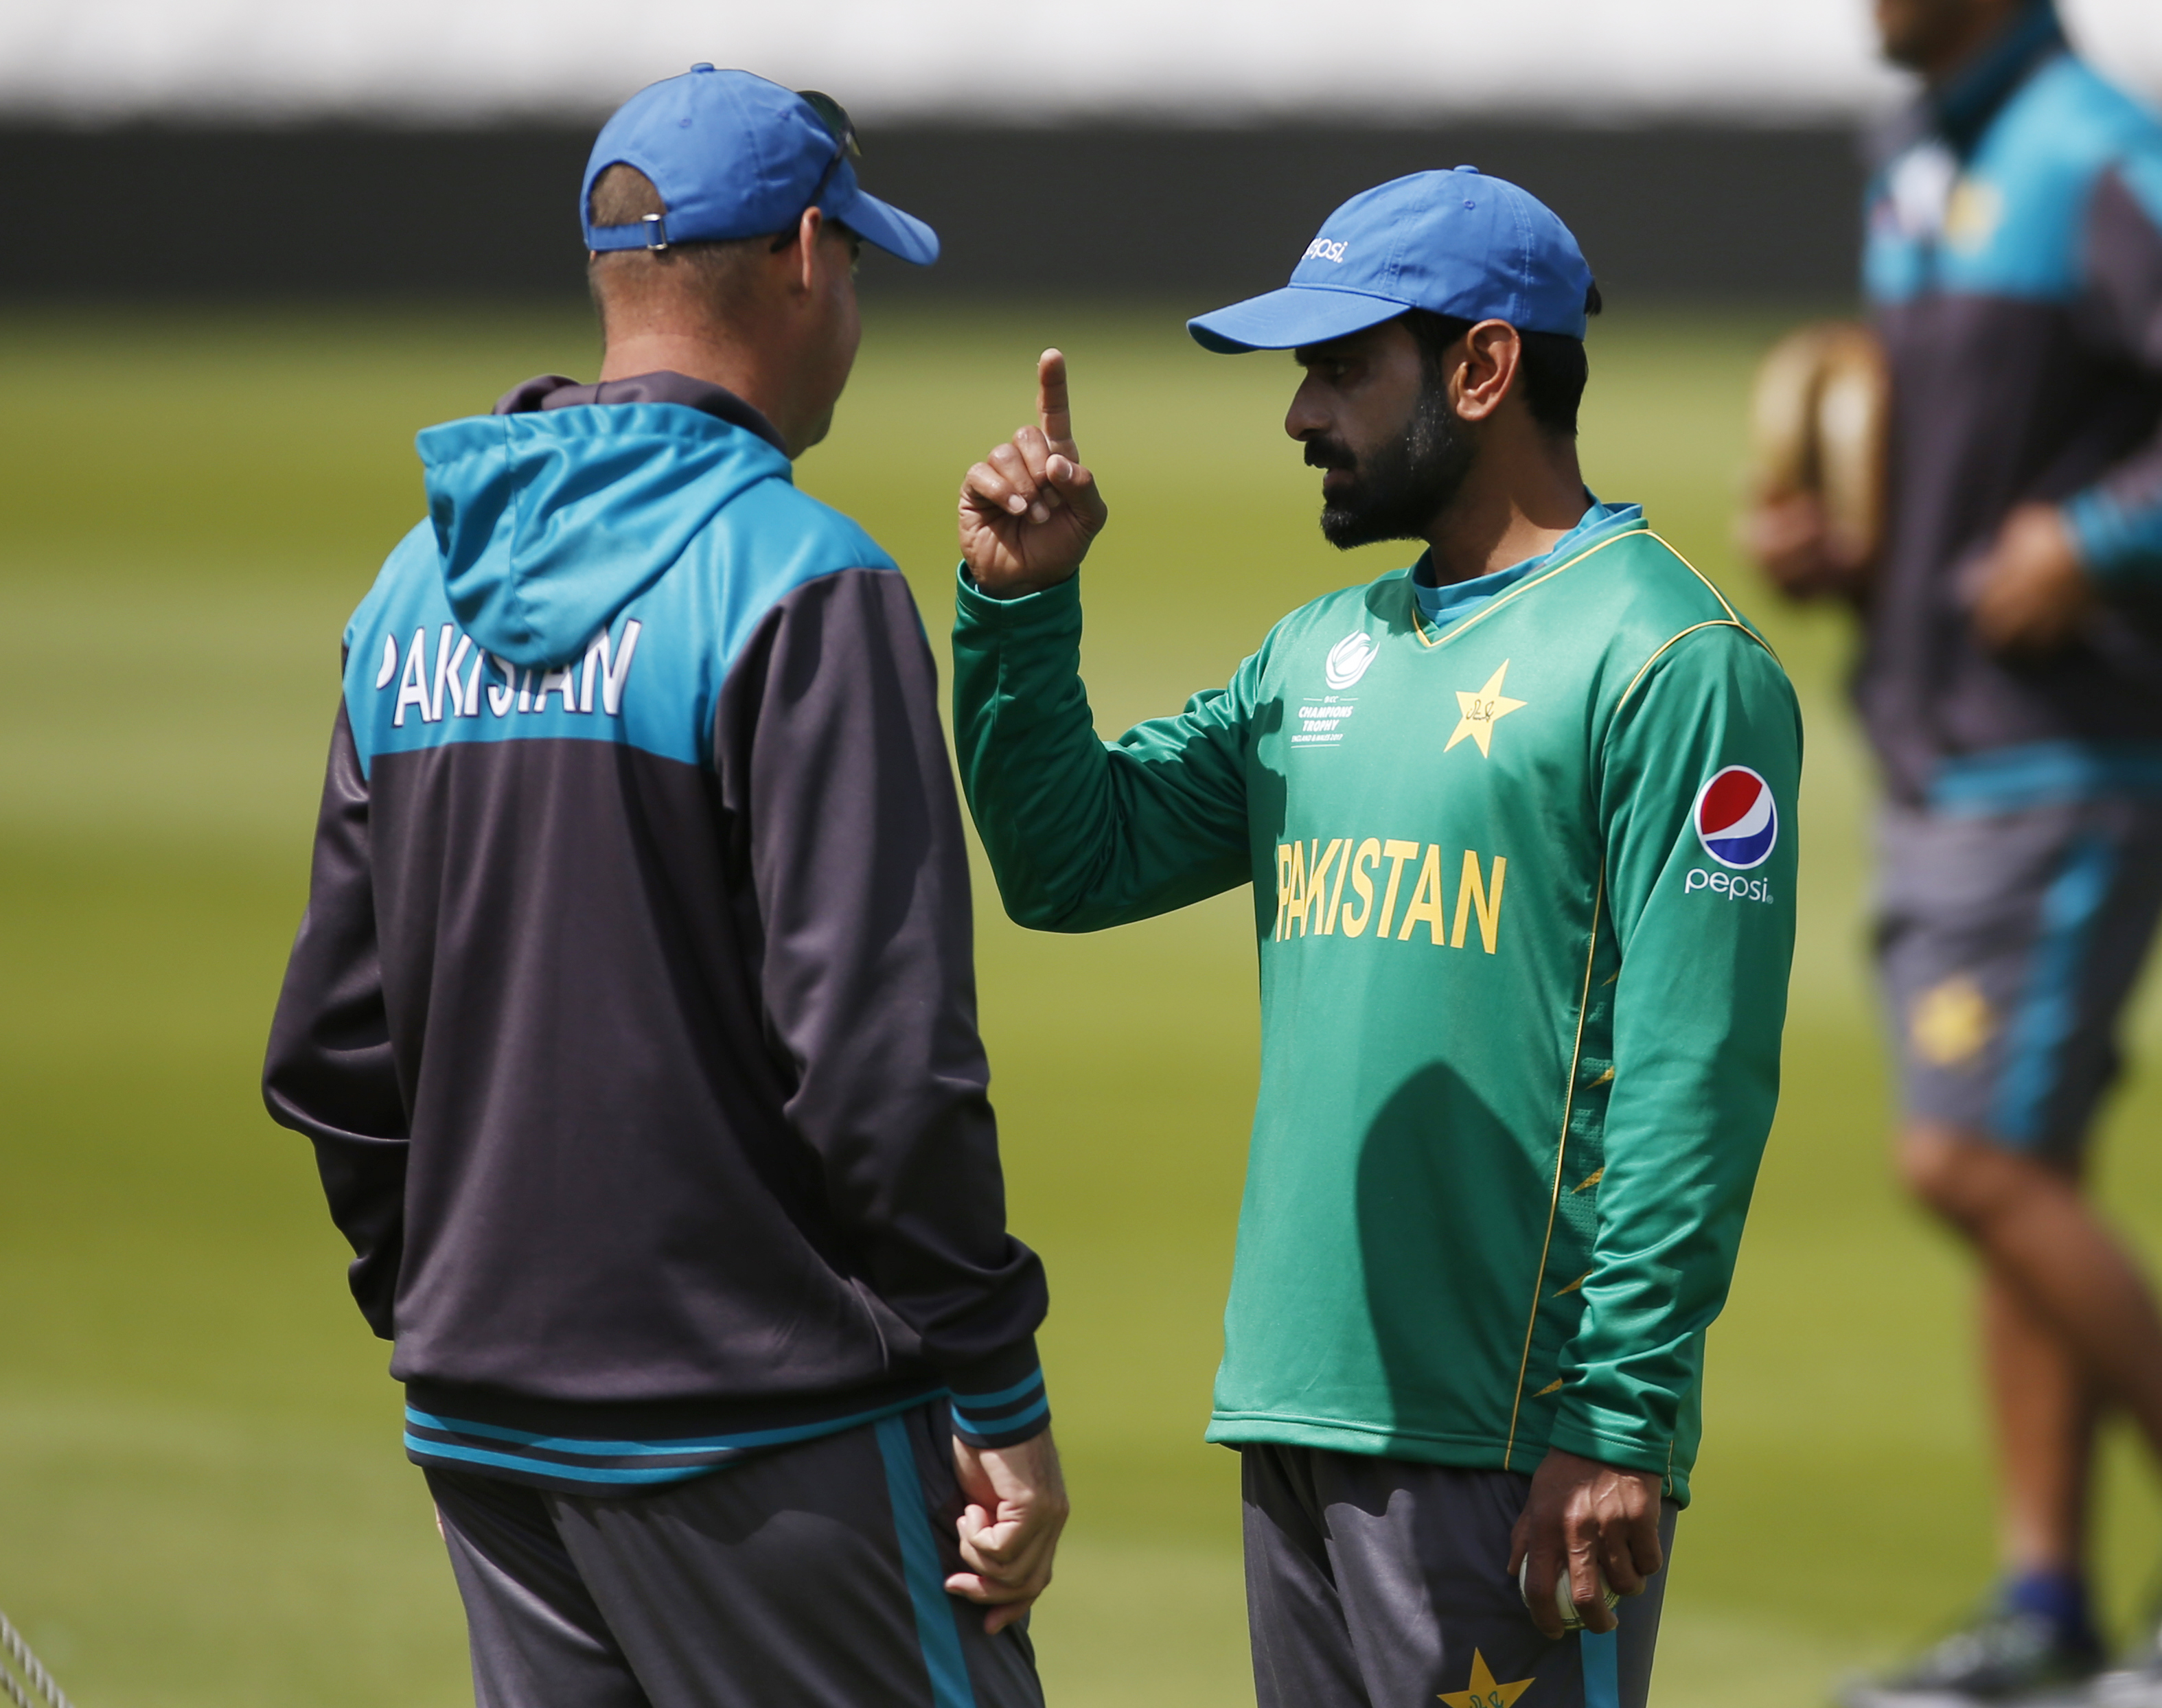 Cricket: Consistent India take on confident Pakistan in Champions Trophy final